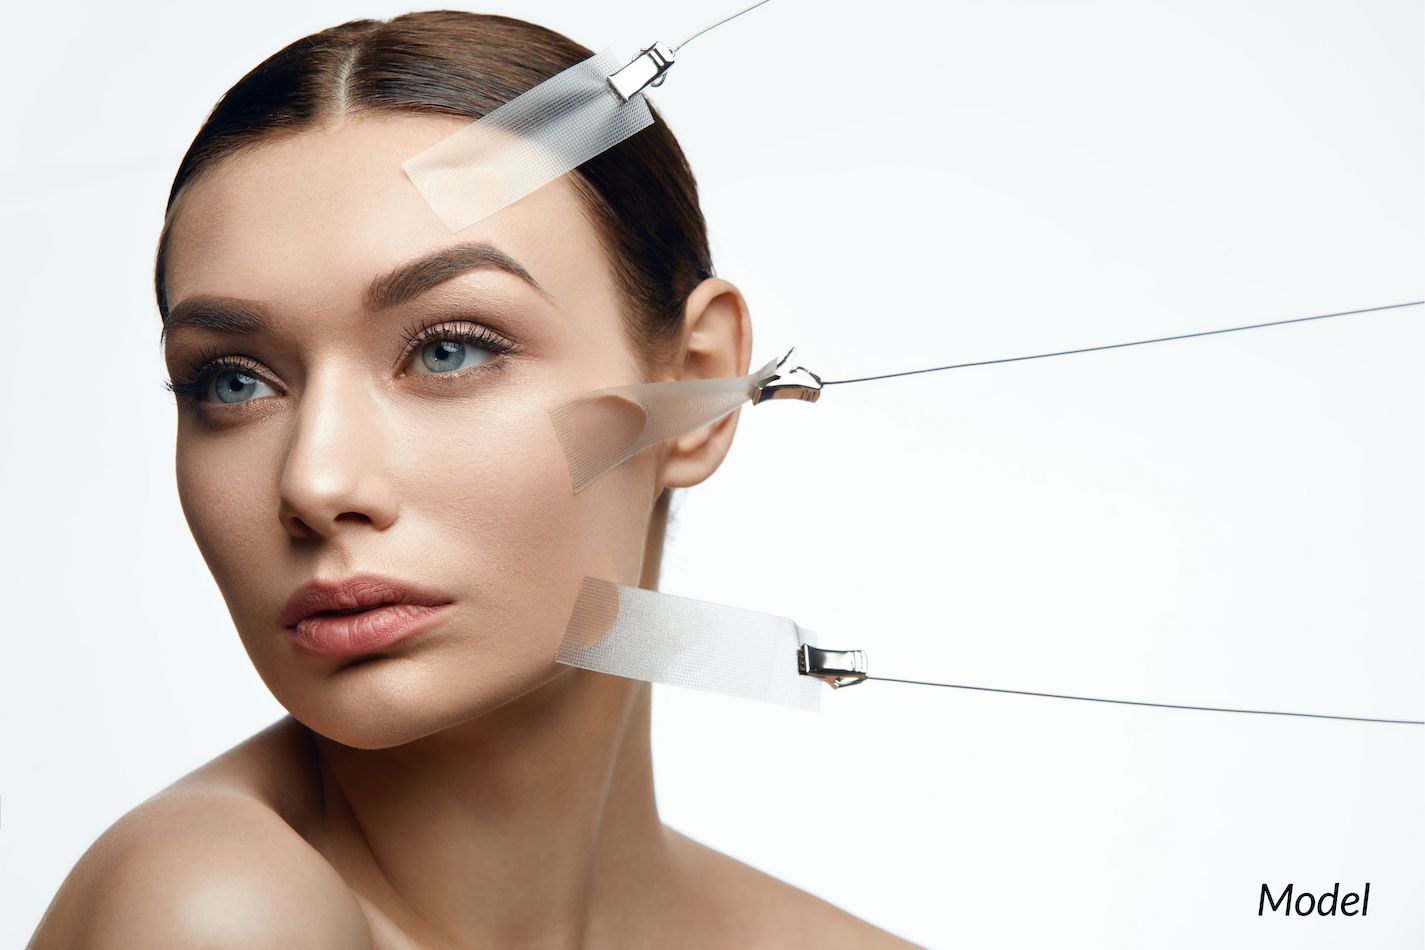 How Has Facelift Surgery Changed? A Look at the Ever-Evolving Anti-Aging Procedure